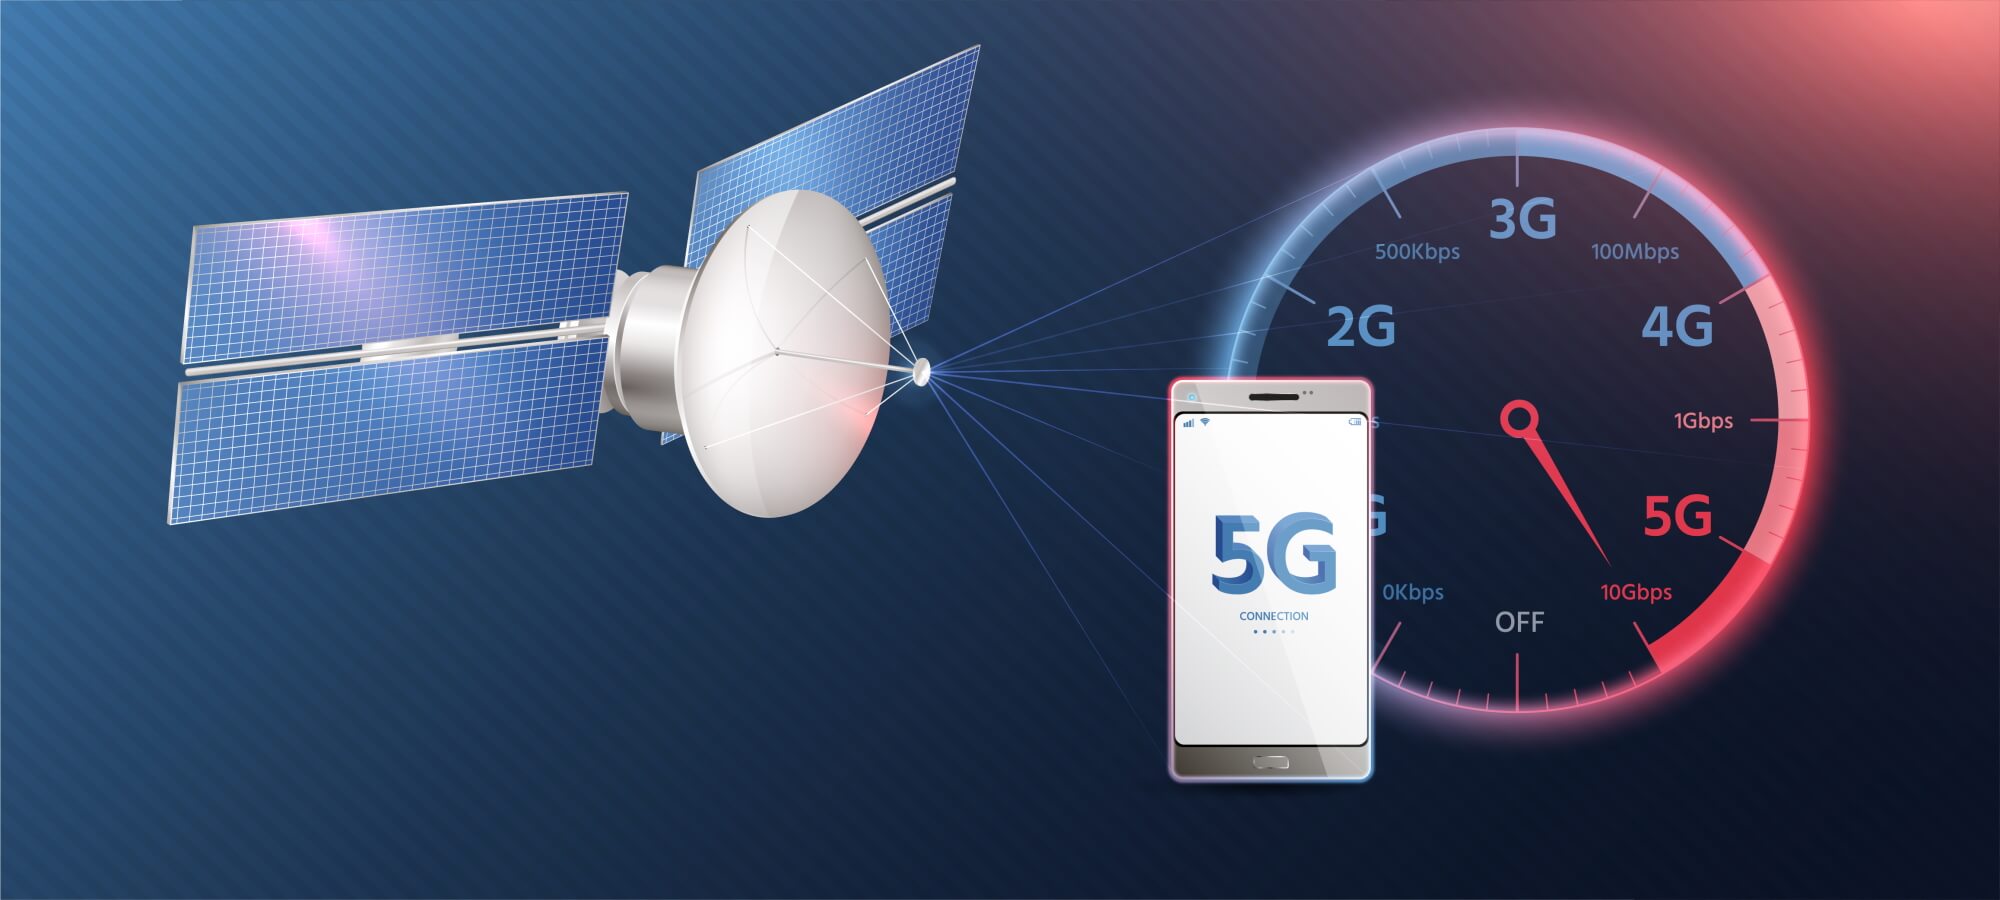 "What You Need to Know About 5G in 2020 - Image 3"